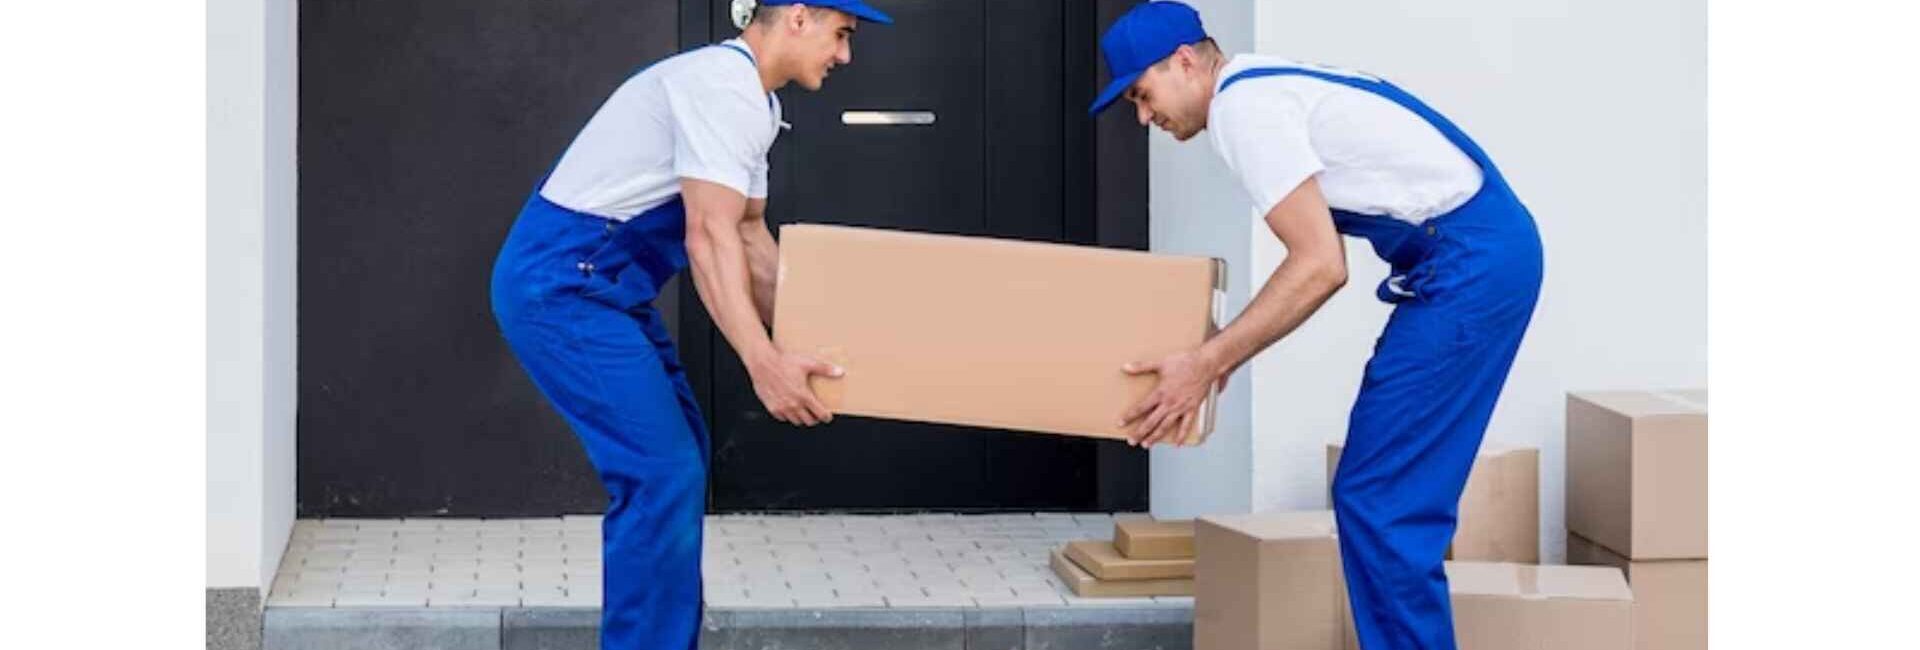 Superfast Packers and Movers - Packers and Movers Service in Noida